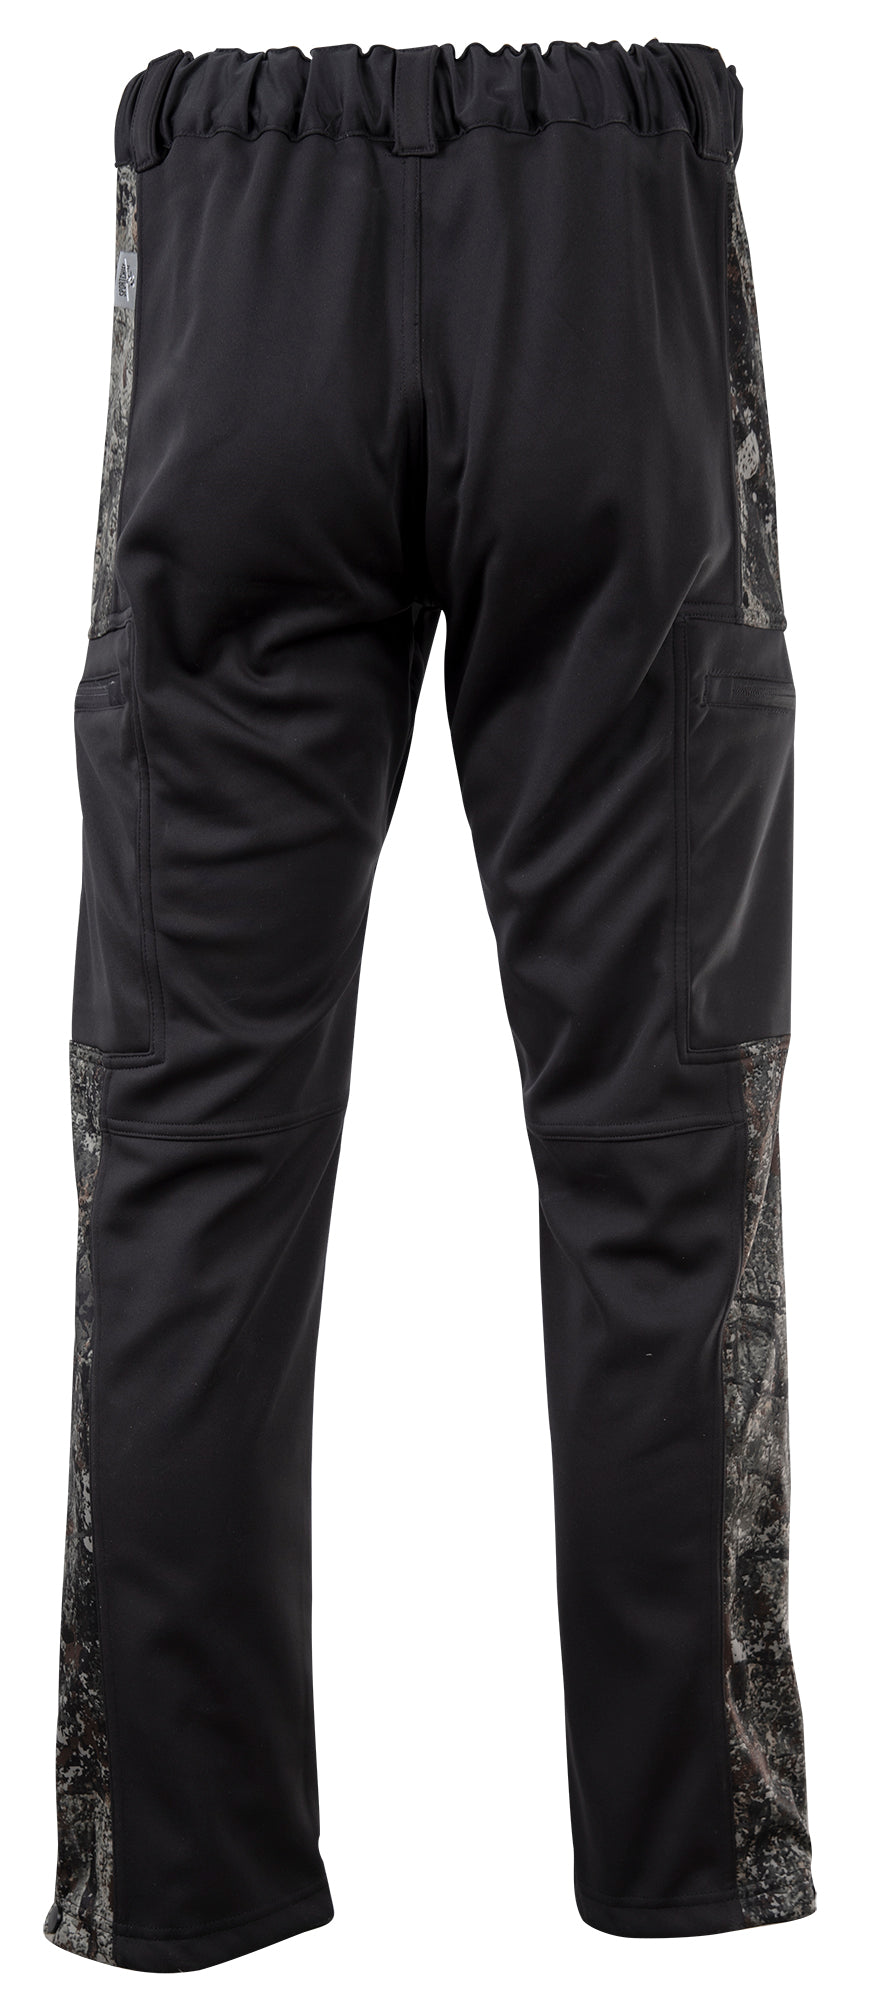 Men's hunting camo pants Jason T. Morneau "The Hunting Beast" Collection - Sportchief